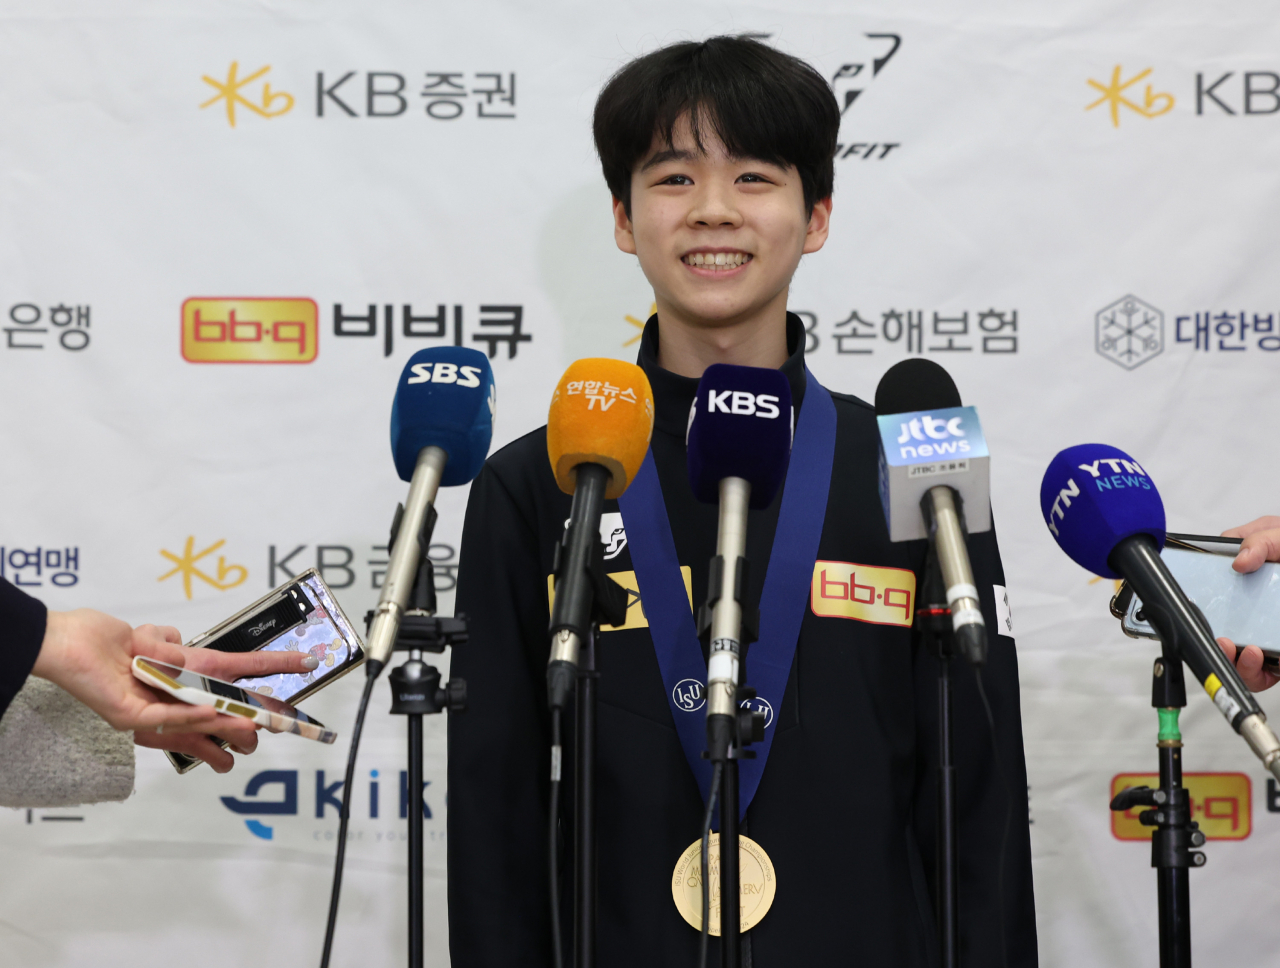 After returning to Korea on Monday, South Korean figure skater Seo Min-kyu answers reporters' questions at the Incheon International Airport. (Yonhap)